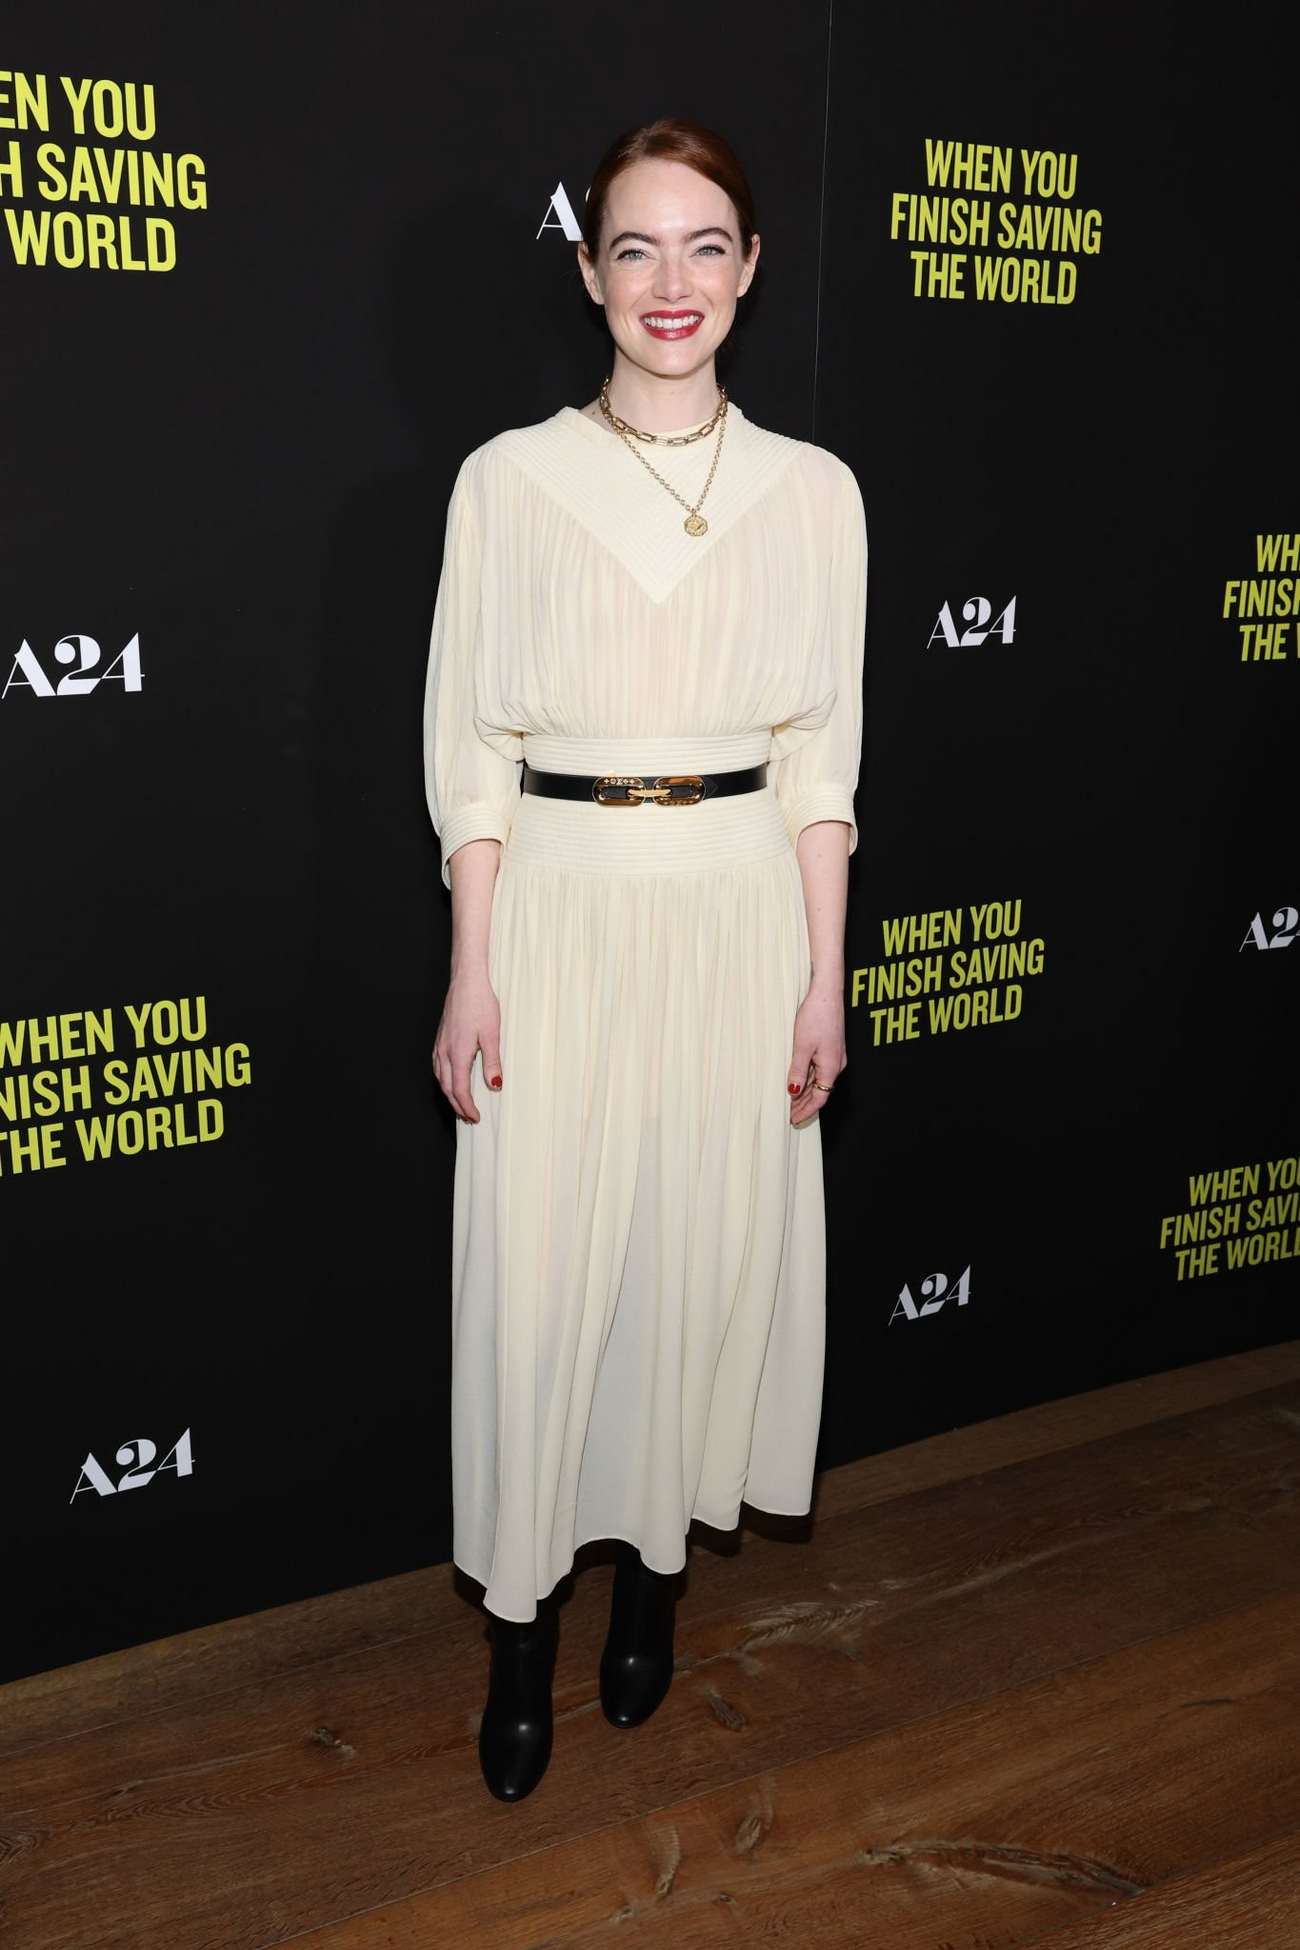 Emma Stone at “When You Finish Saving The World”Premiere on January 12